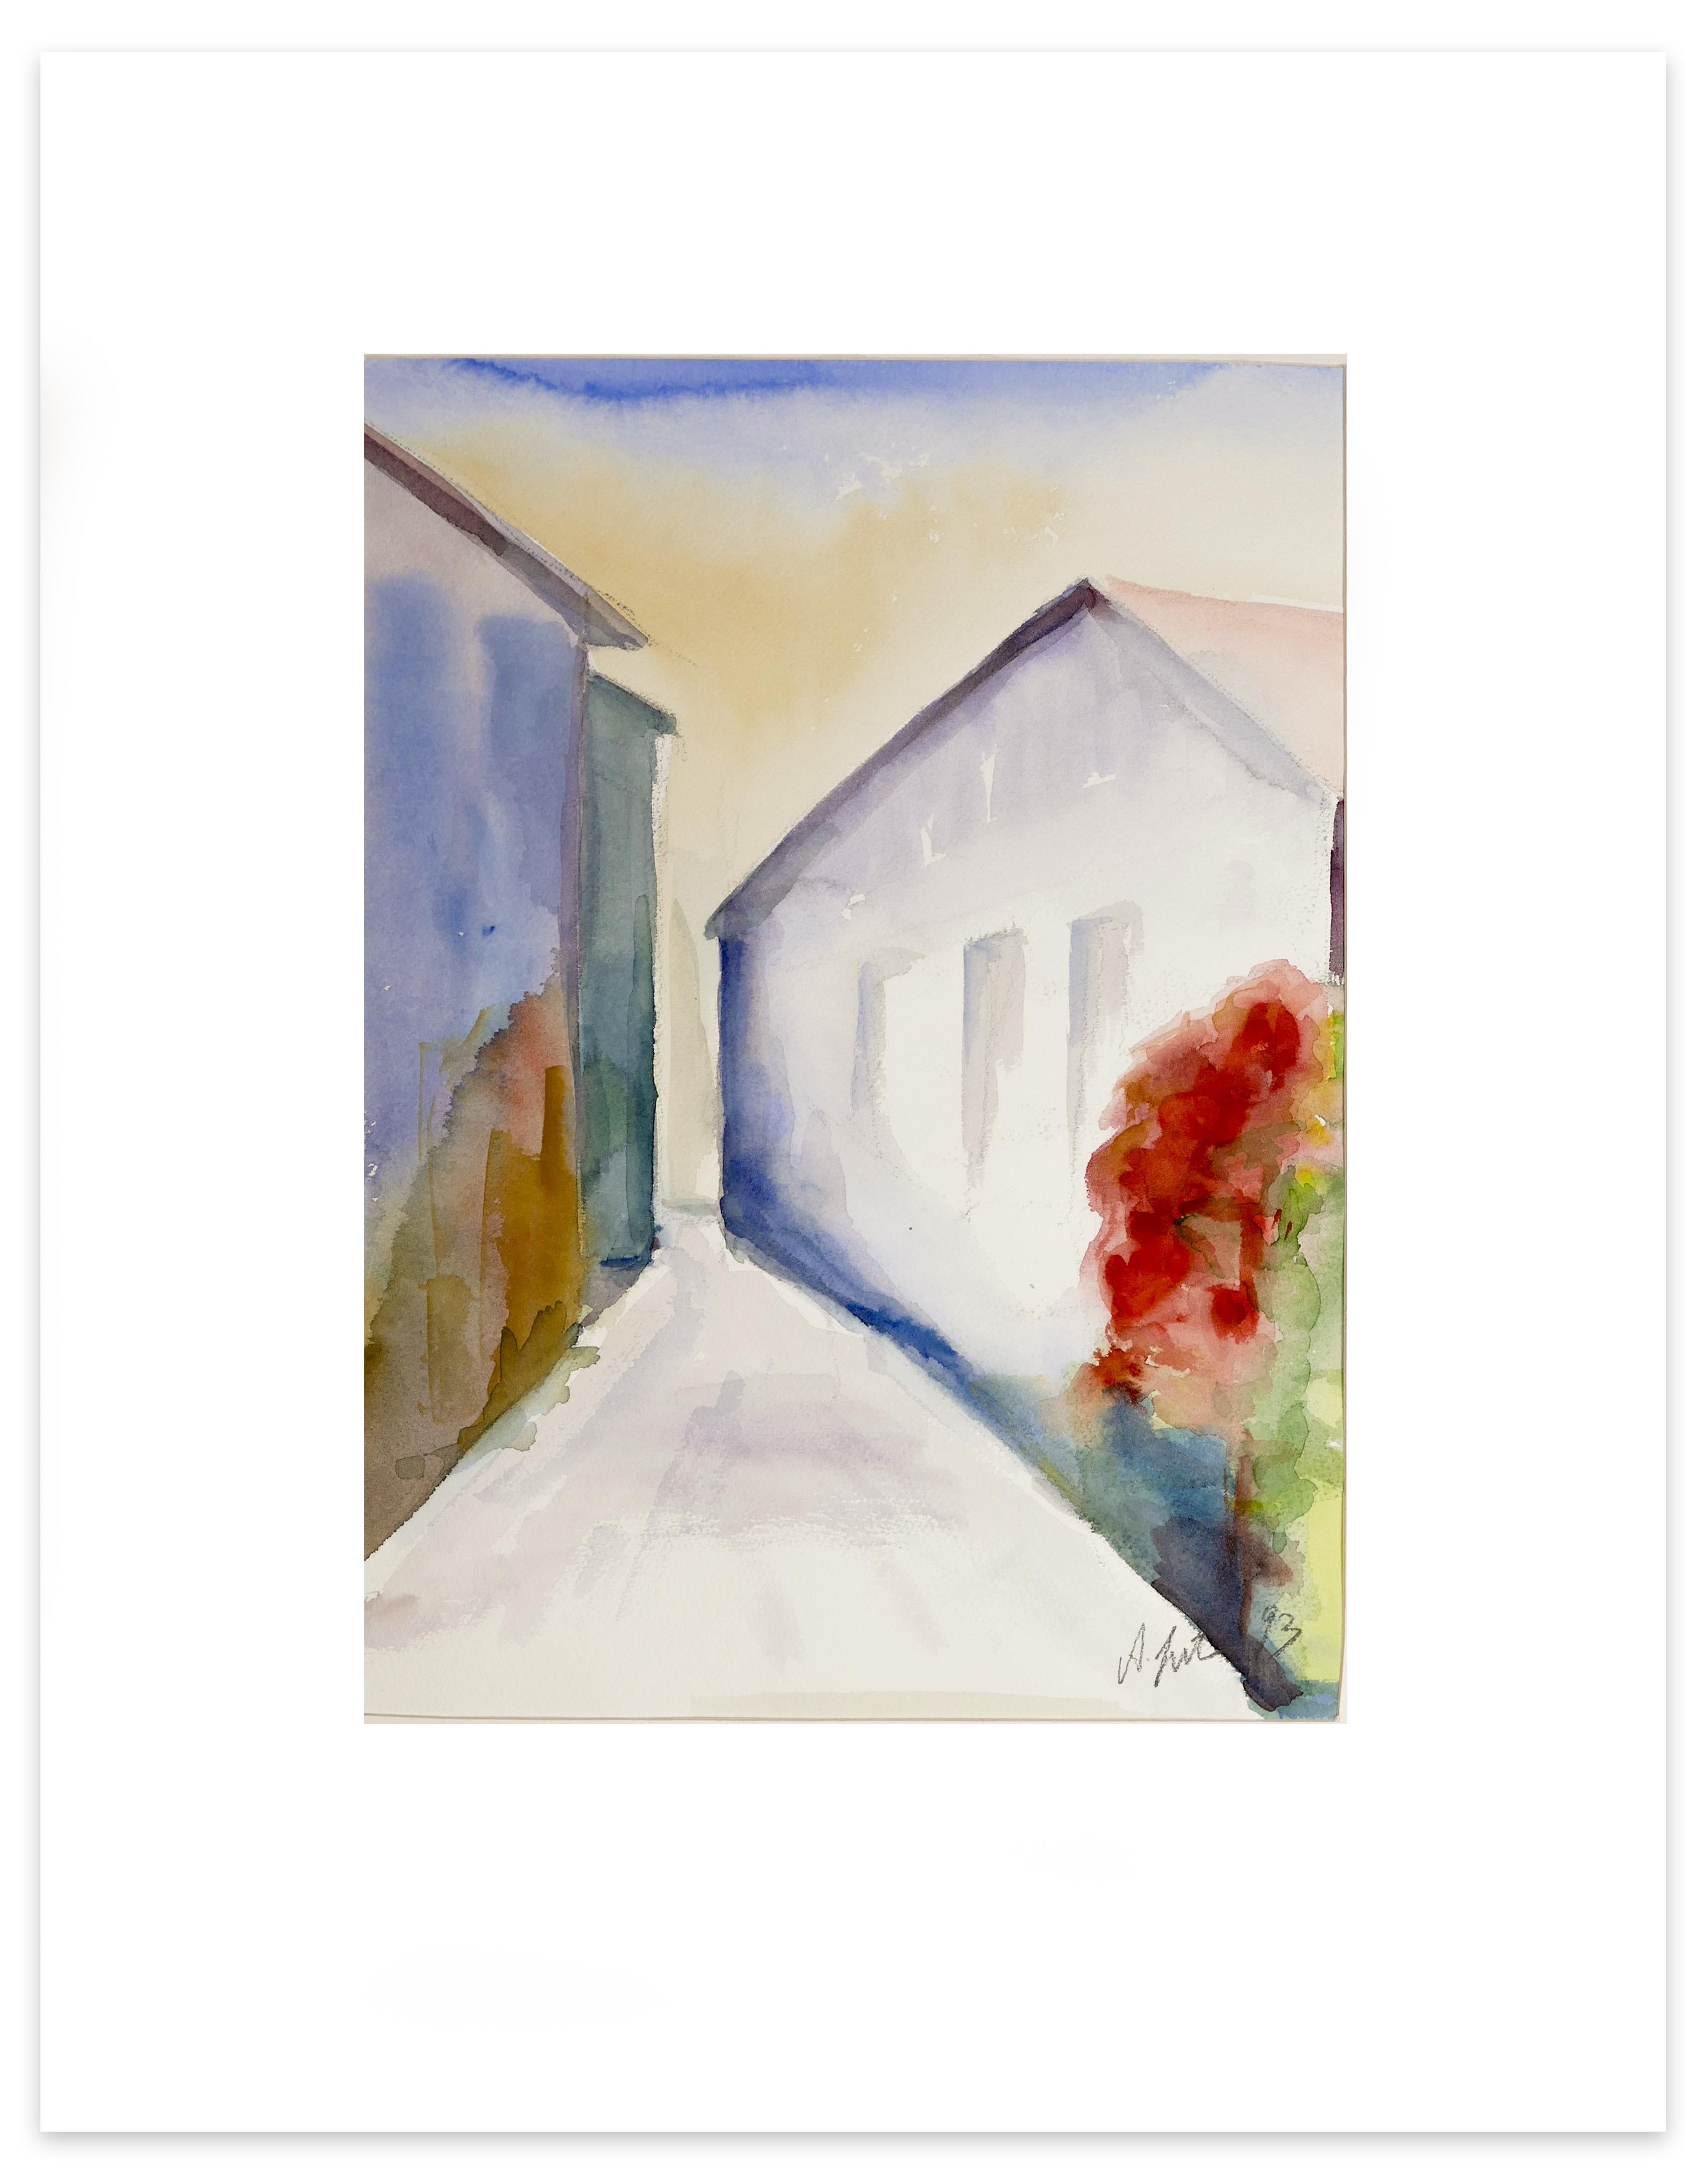 Narrow Alley is an original watercolor on paper, realized in 1993 by Armin Guther.

In excellent condition. Including Passepartout (cm 60 x 50)

The artwork is hand-signed and dated in charcoal pencil on the lower right corner. 

This beautiful